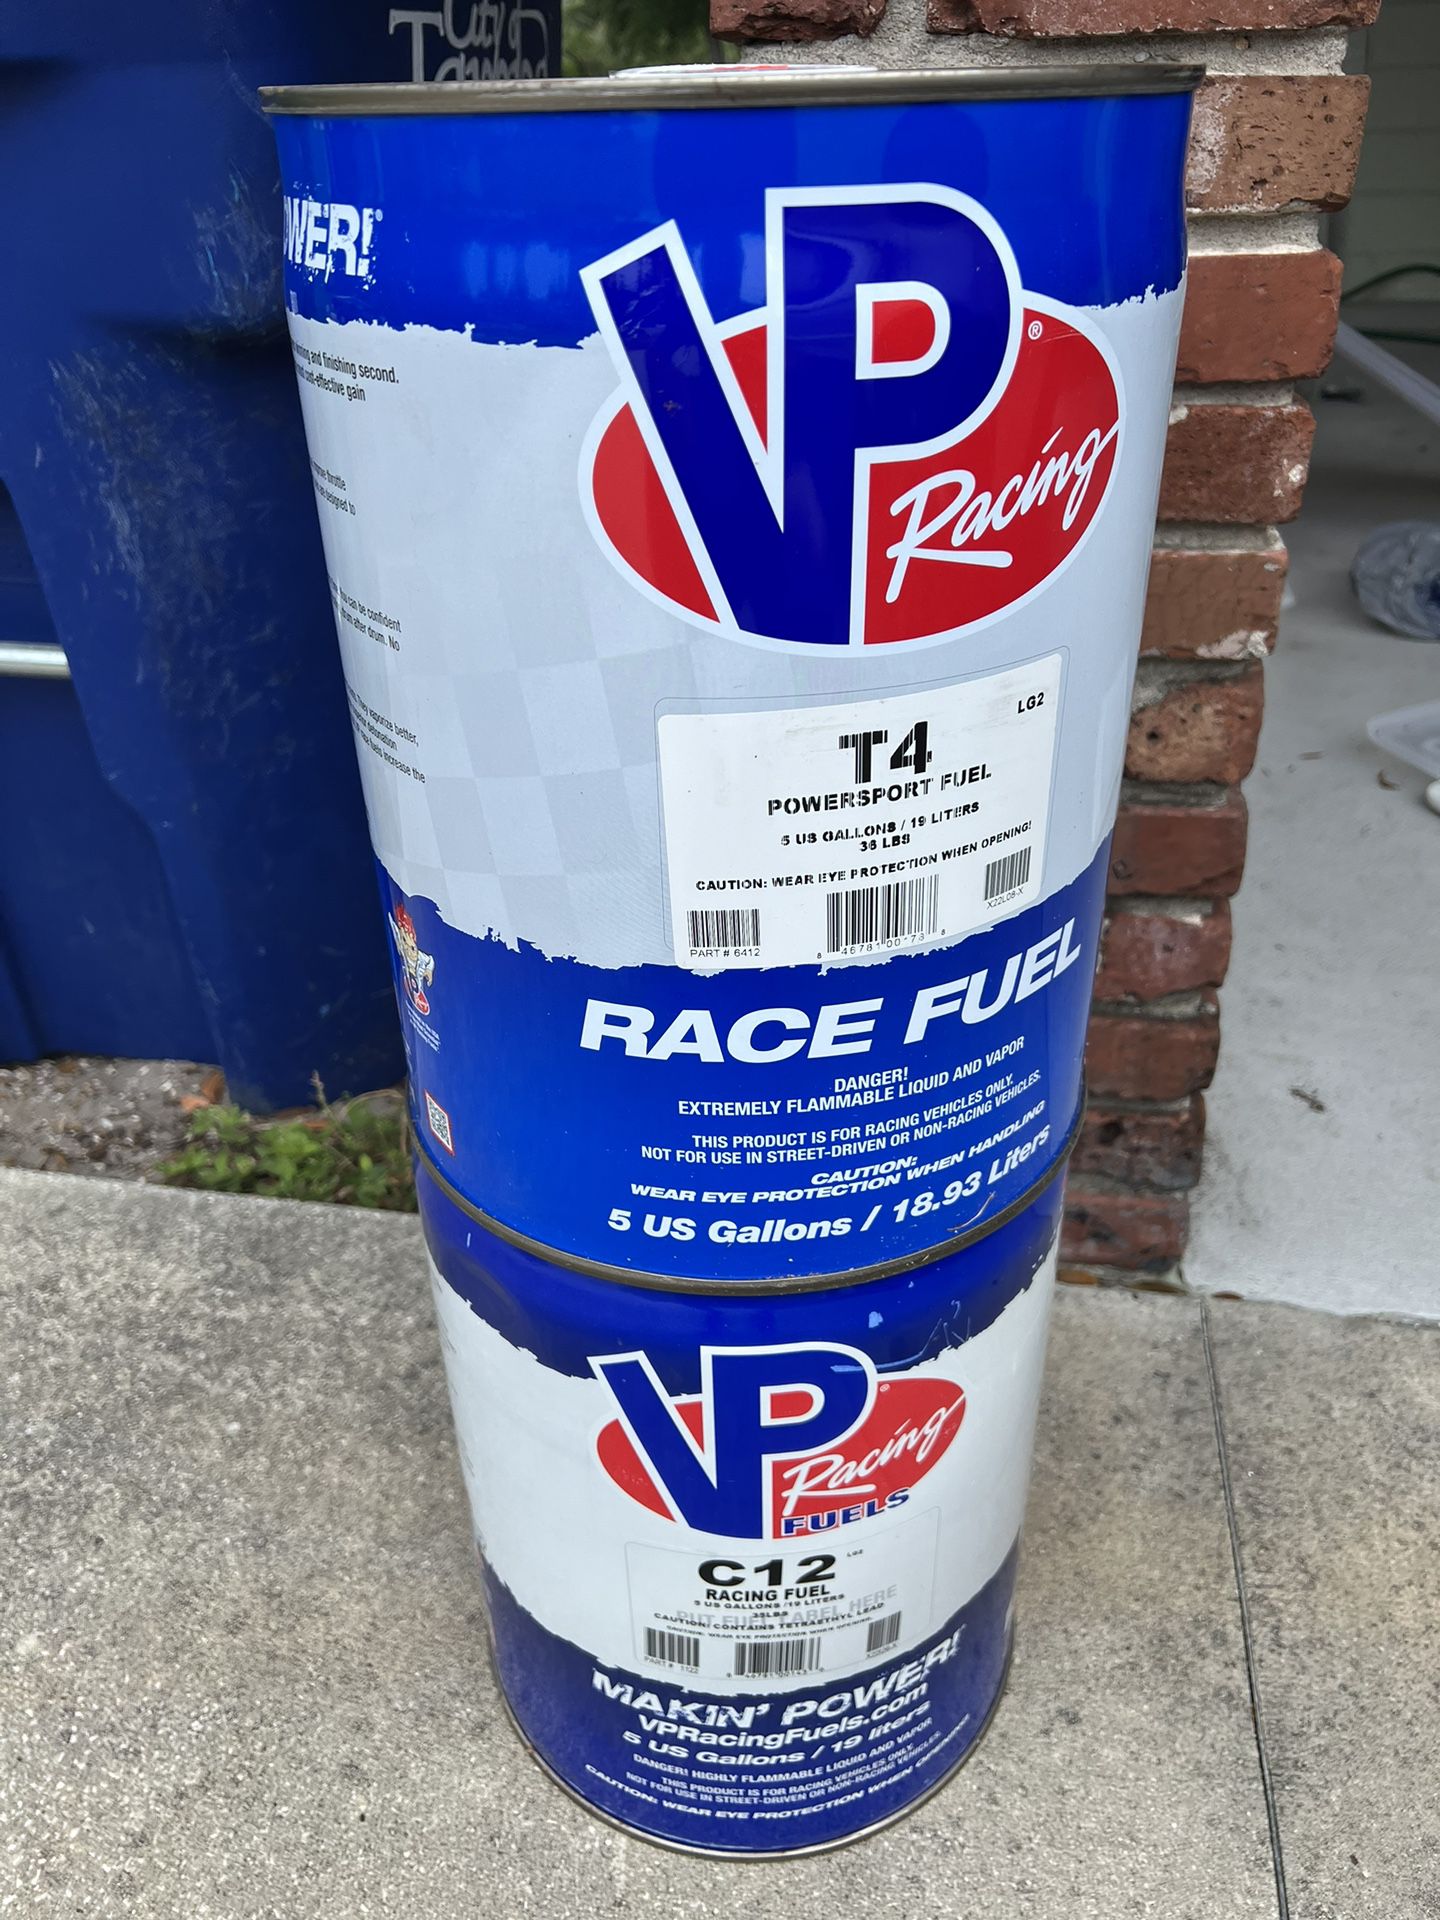 Free - T4 Race Fuel - Not Opened 